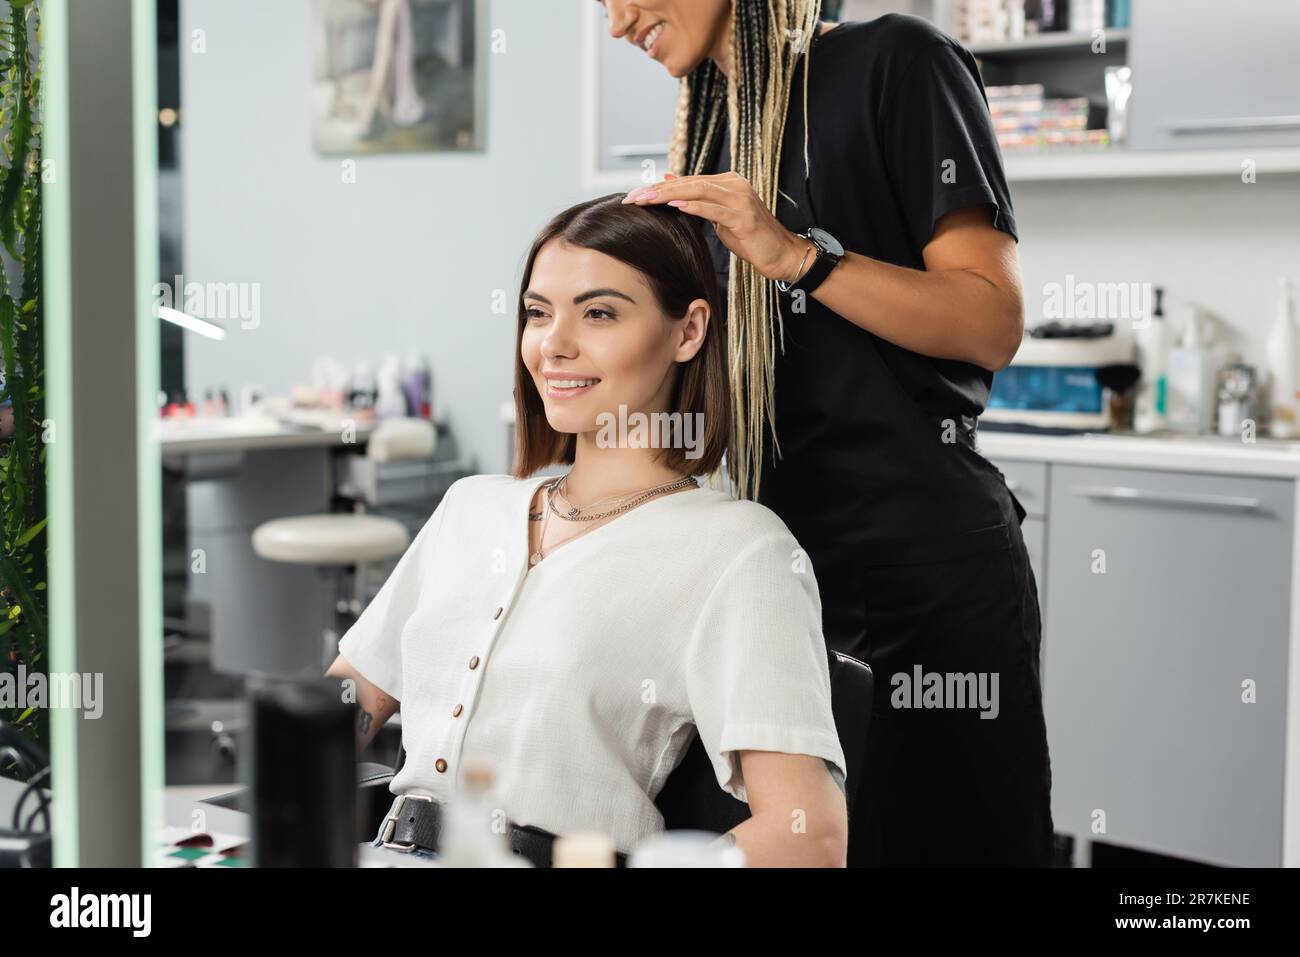 beauty salon work, happy hairdresser with braids and female client, hairstyling, hair treatment, hairdo, extension, salon customer, beauty profession, Stock Photo